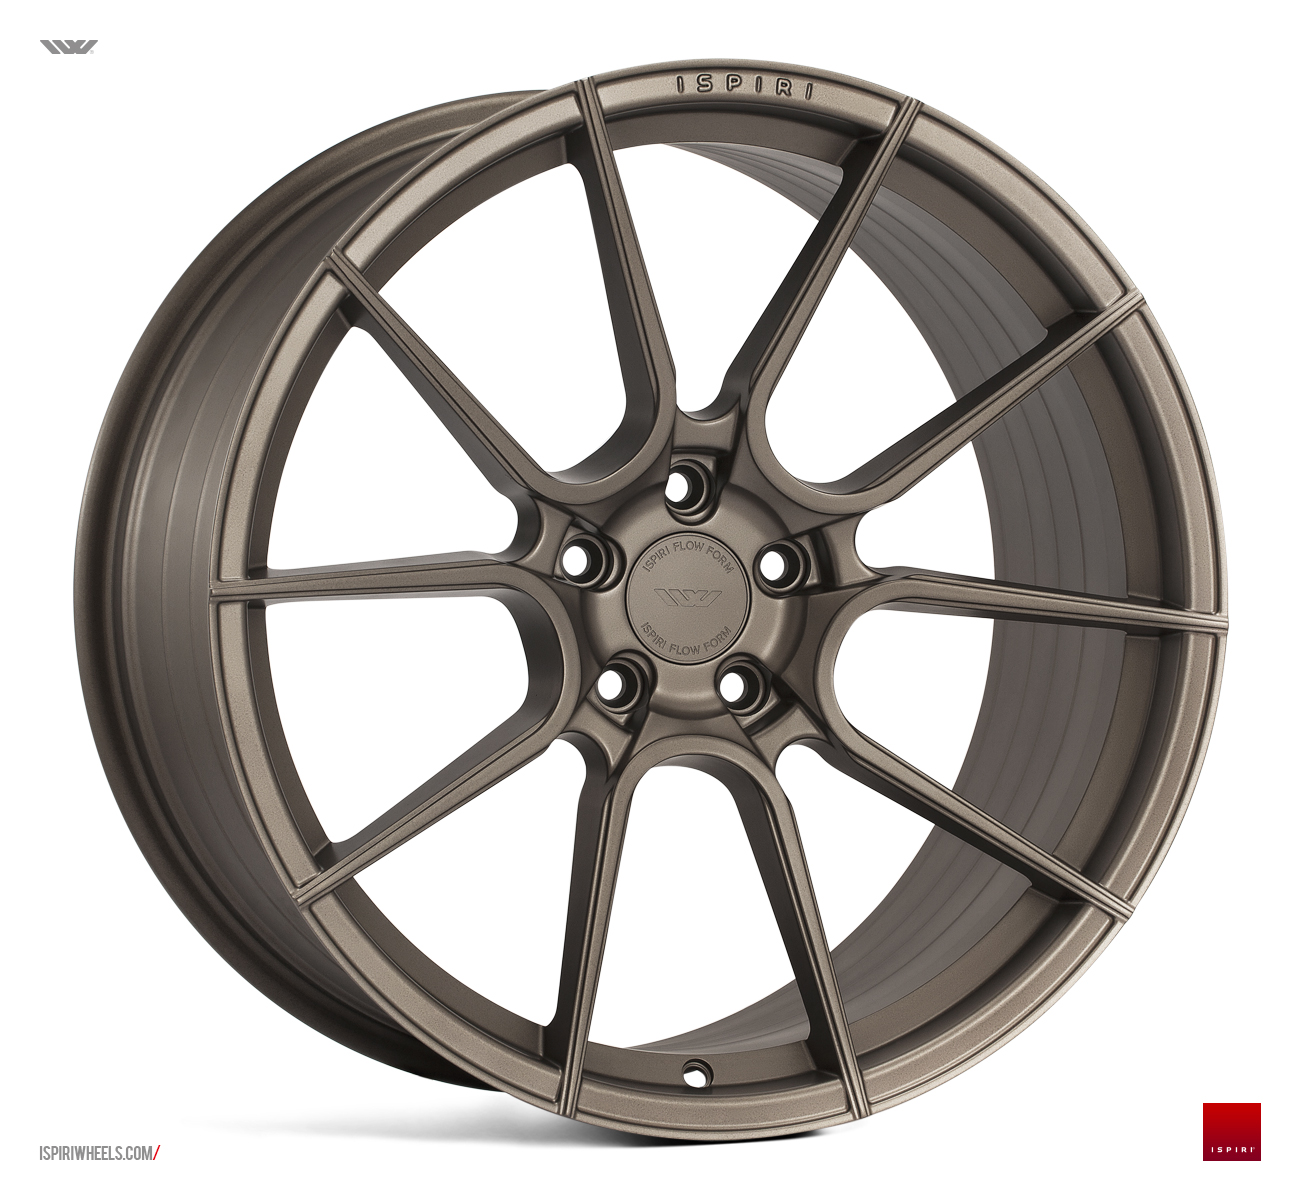 NEW 19  ISPIRI FFR6 TWIN 5 SPOKE ALLOY WHEELS IN MATT CARBON BRONZE  VARIOUS FITMENTS AVAILABLE